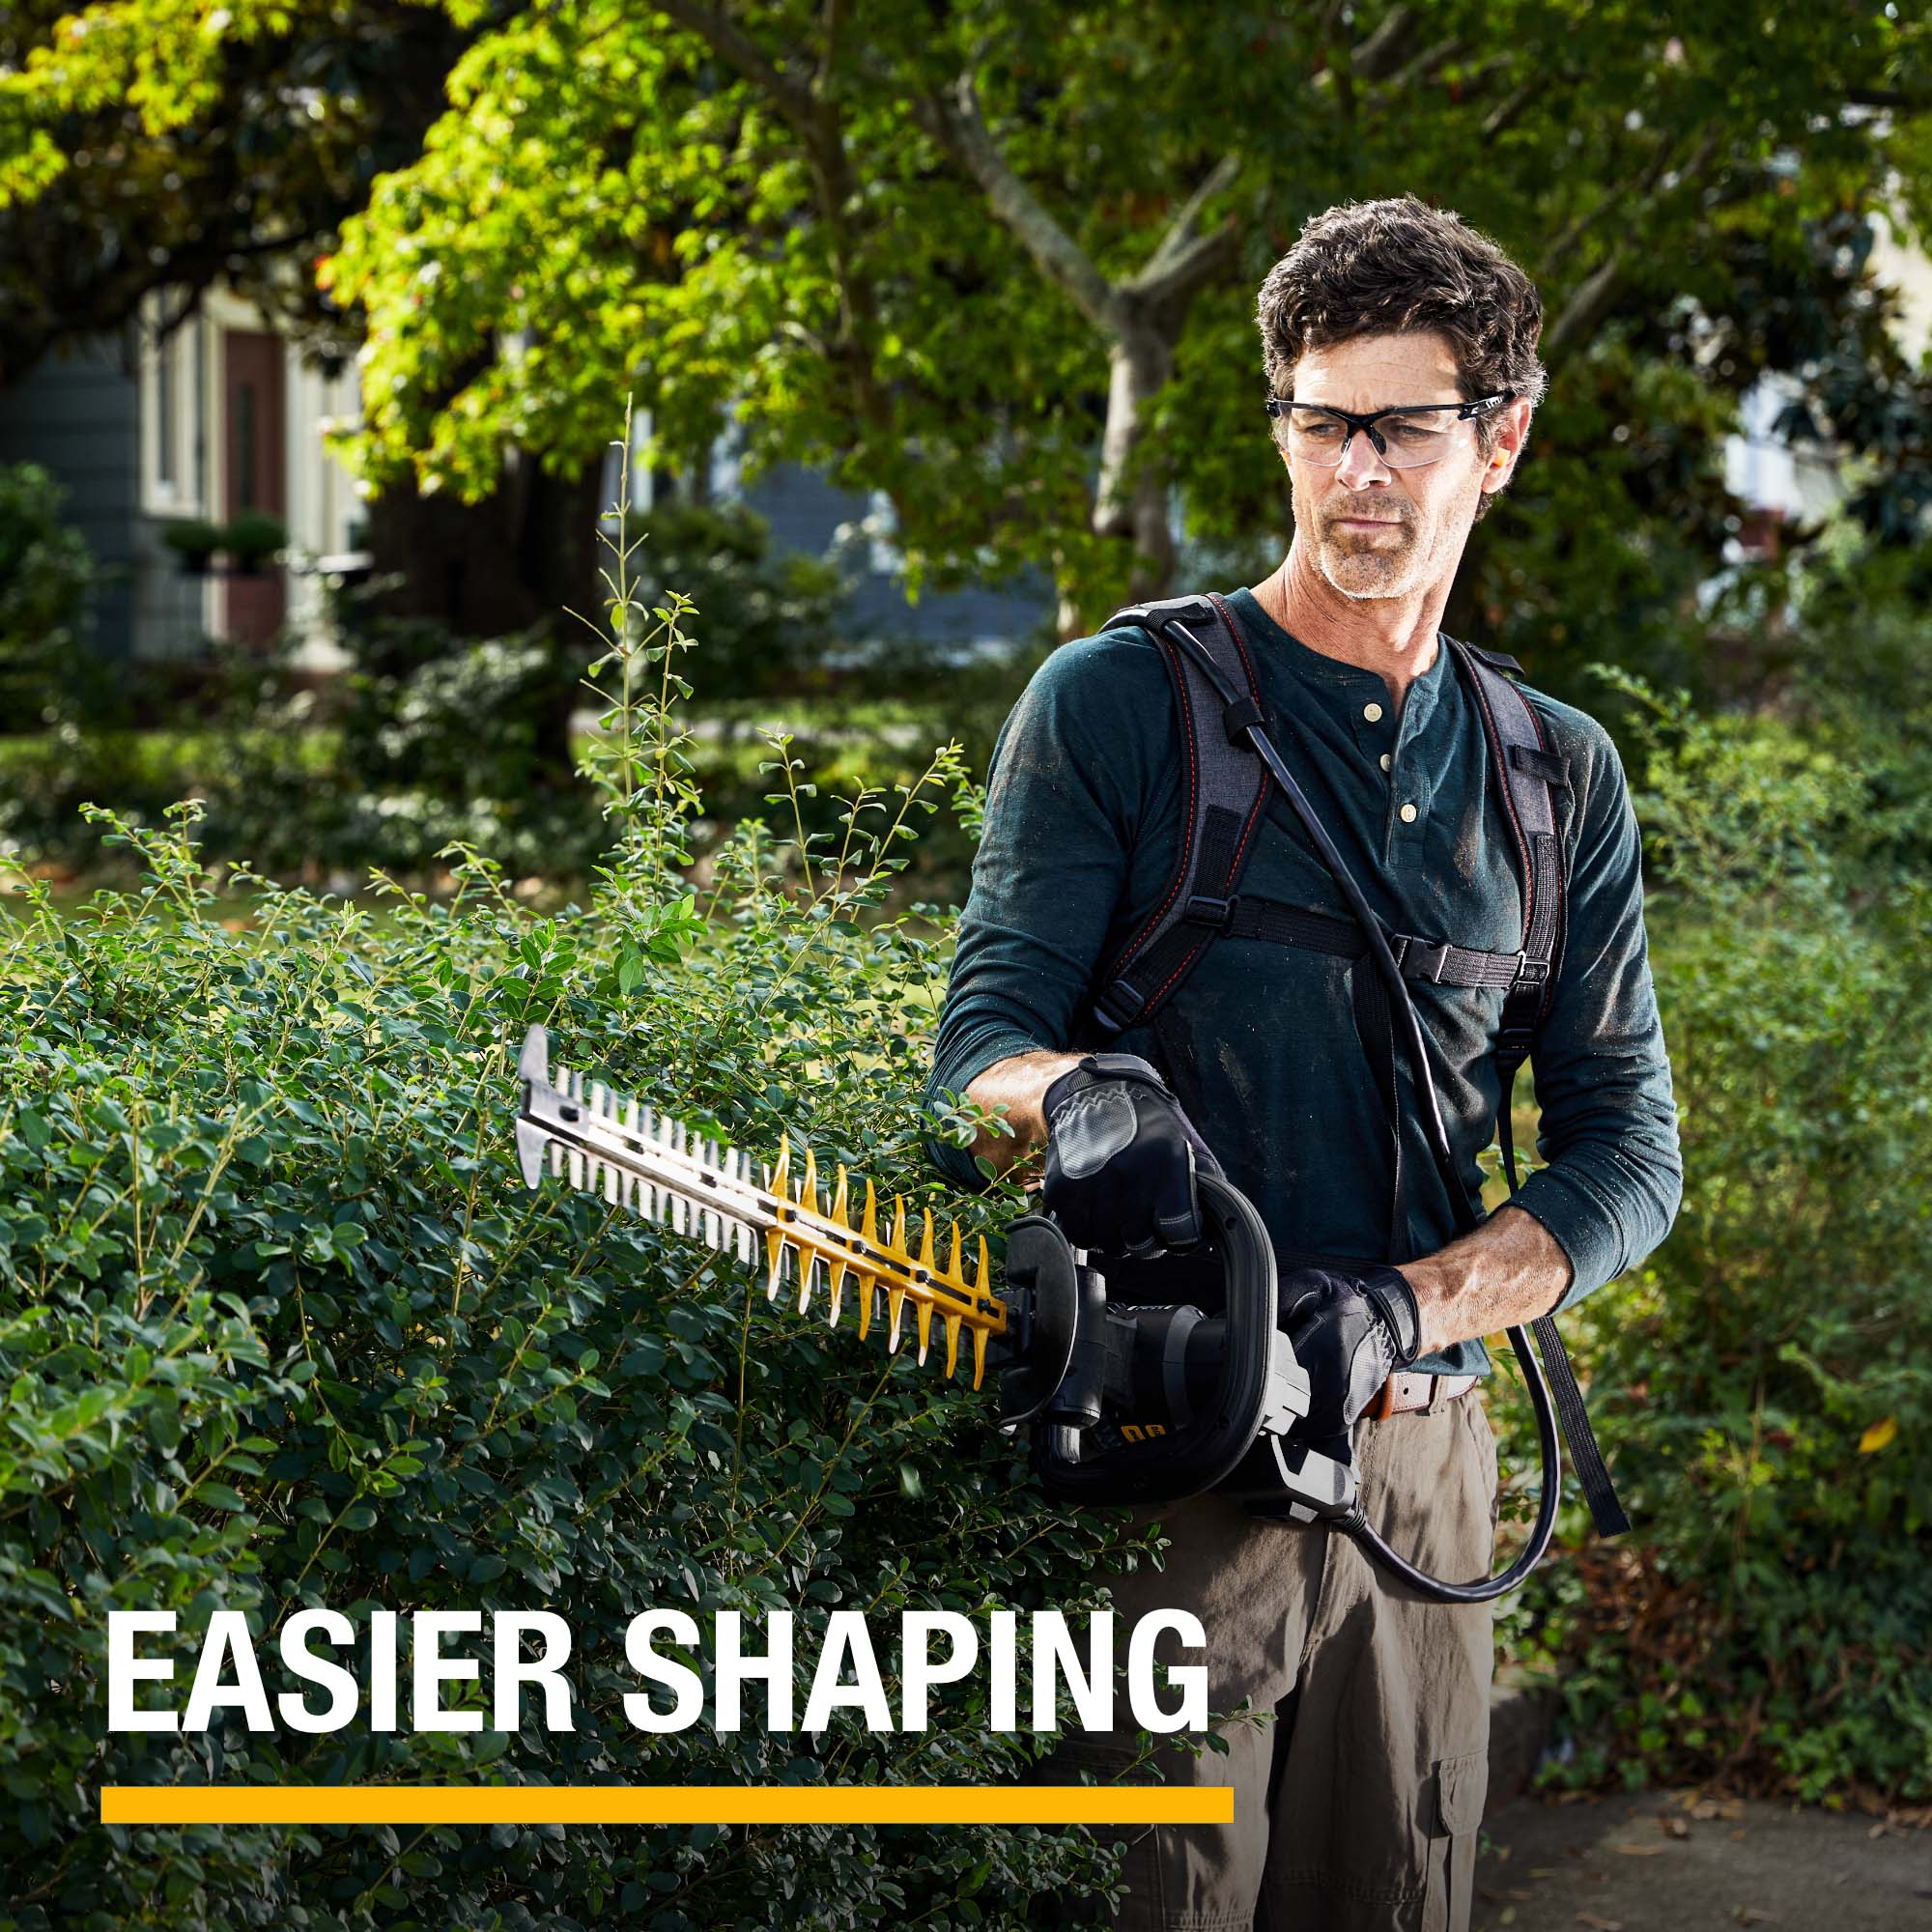 WORX NITRO POWER SHARE 40-volt 25-in Hedge Trimmer 2 Ah (Battery and  Charger Included) in the Hedge Trimmers department at